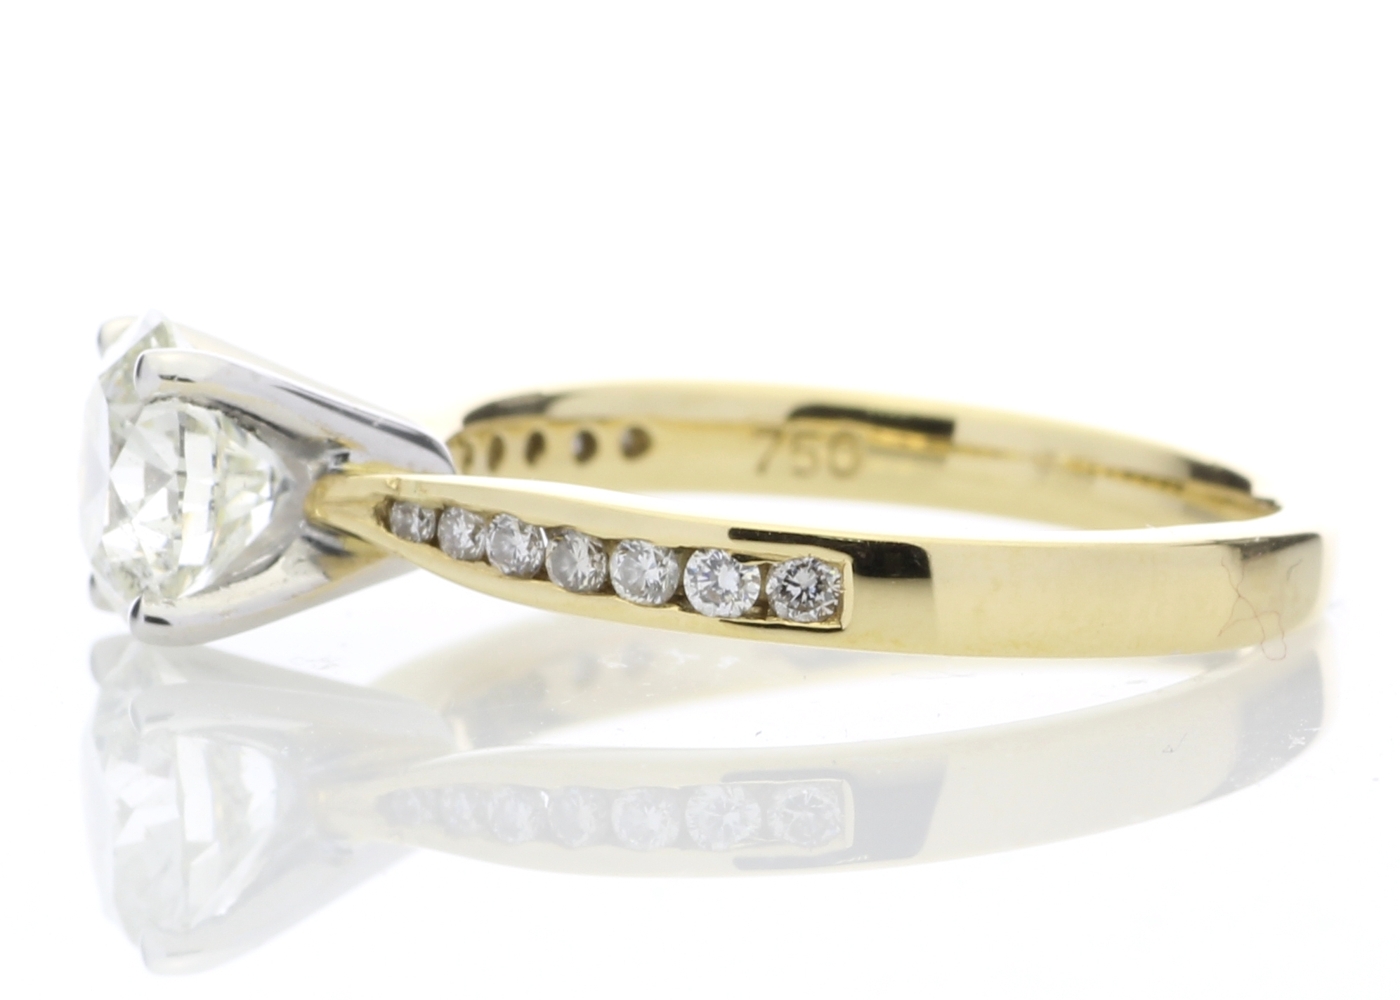 18ct Yellow Gold Diamond Ring With Stone Set Shoulders 1.28 Carats - Valued By IDI £21,775.00 - - Image 3 of 5